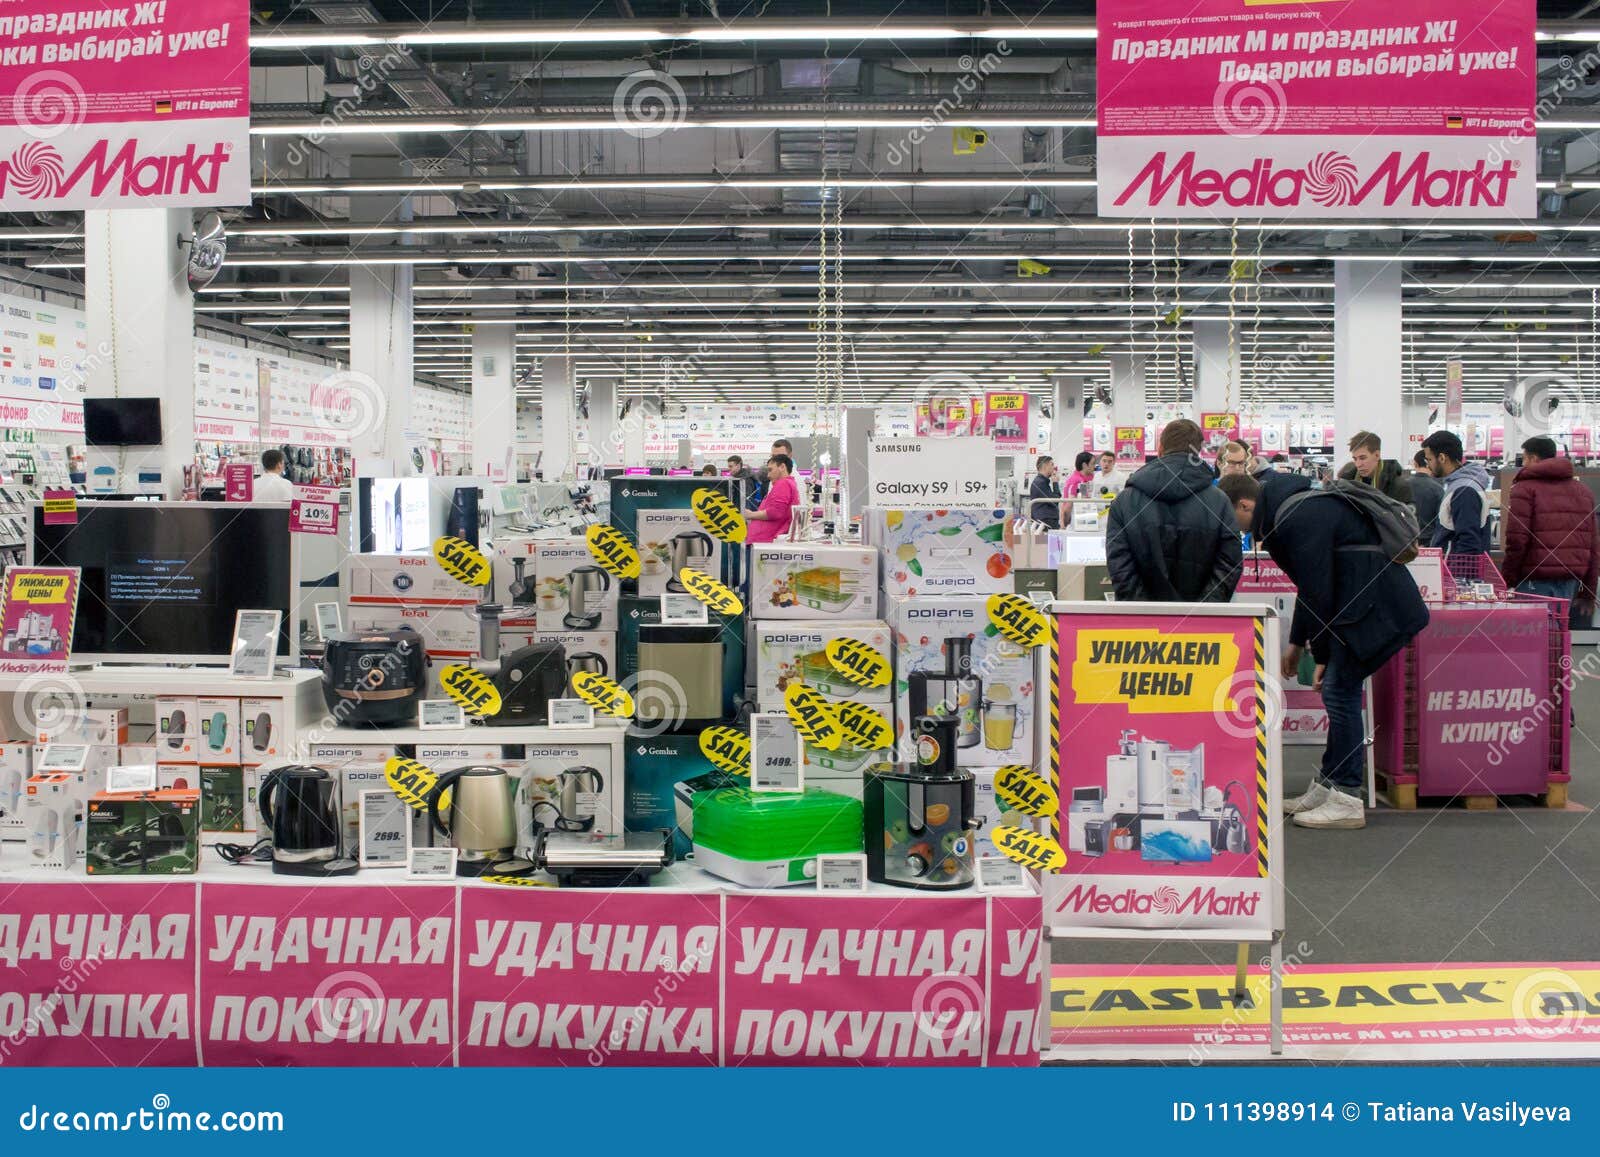 Russia, Moscow,Entrance of a Shop of the Media Markt Consumer Electronics Retailer. Editorial Stock - Image of household, international: 111398914